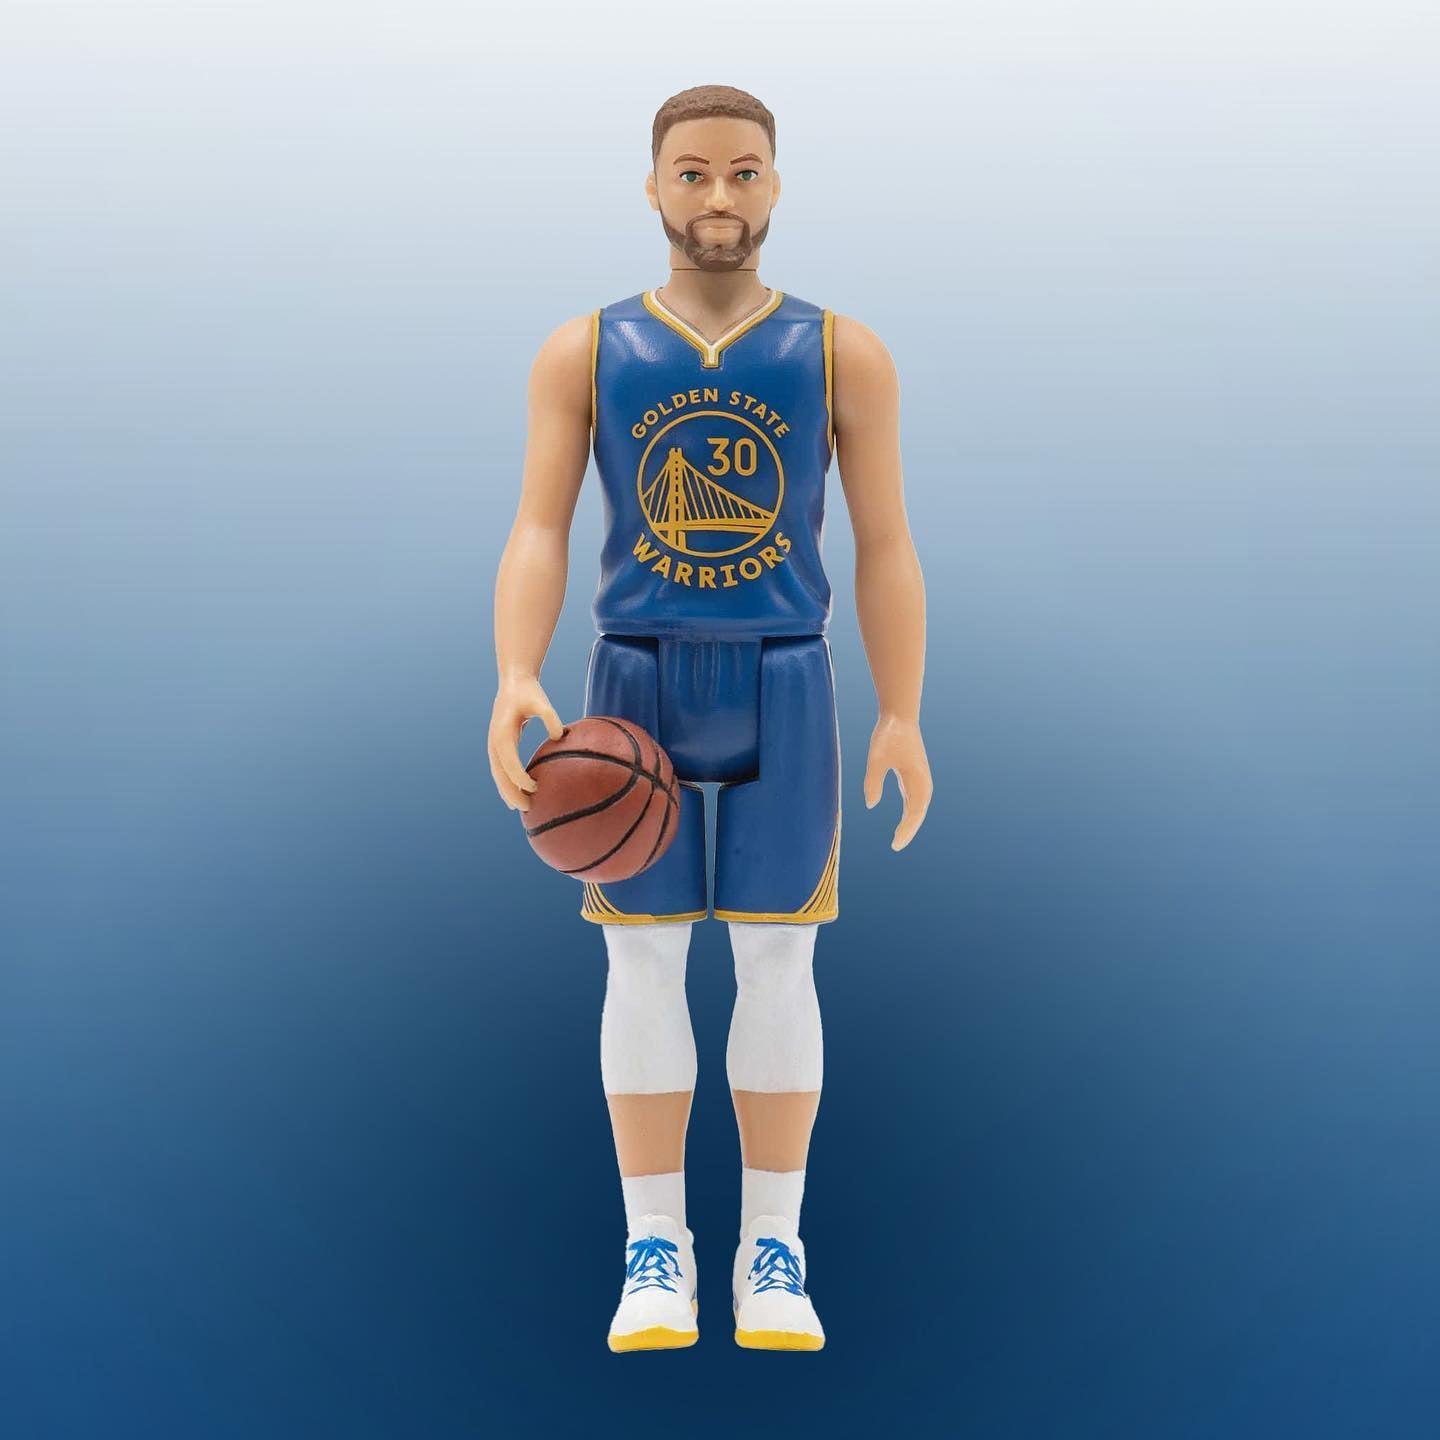 This Stephen Curry Supersports articulated...